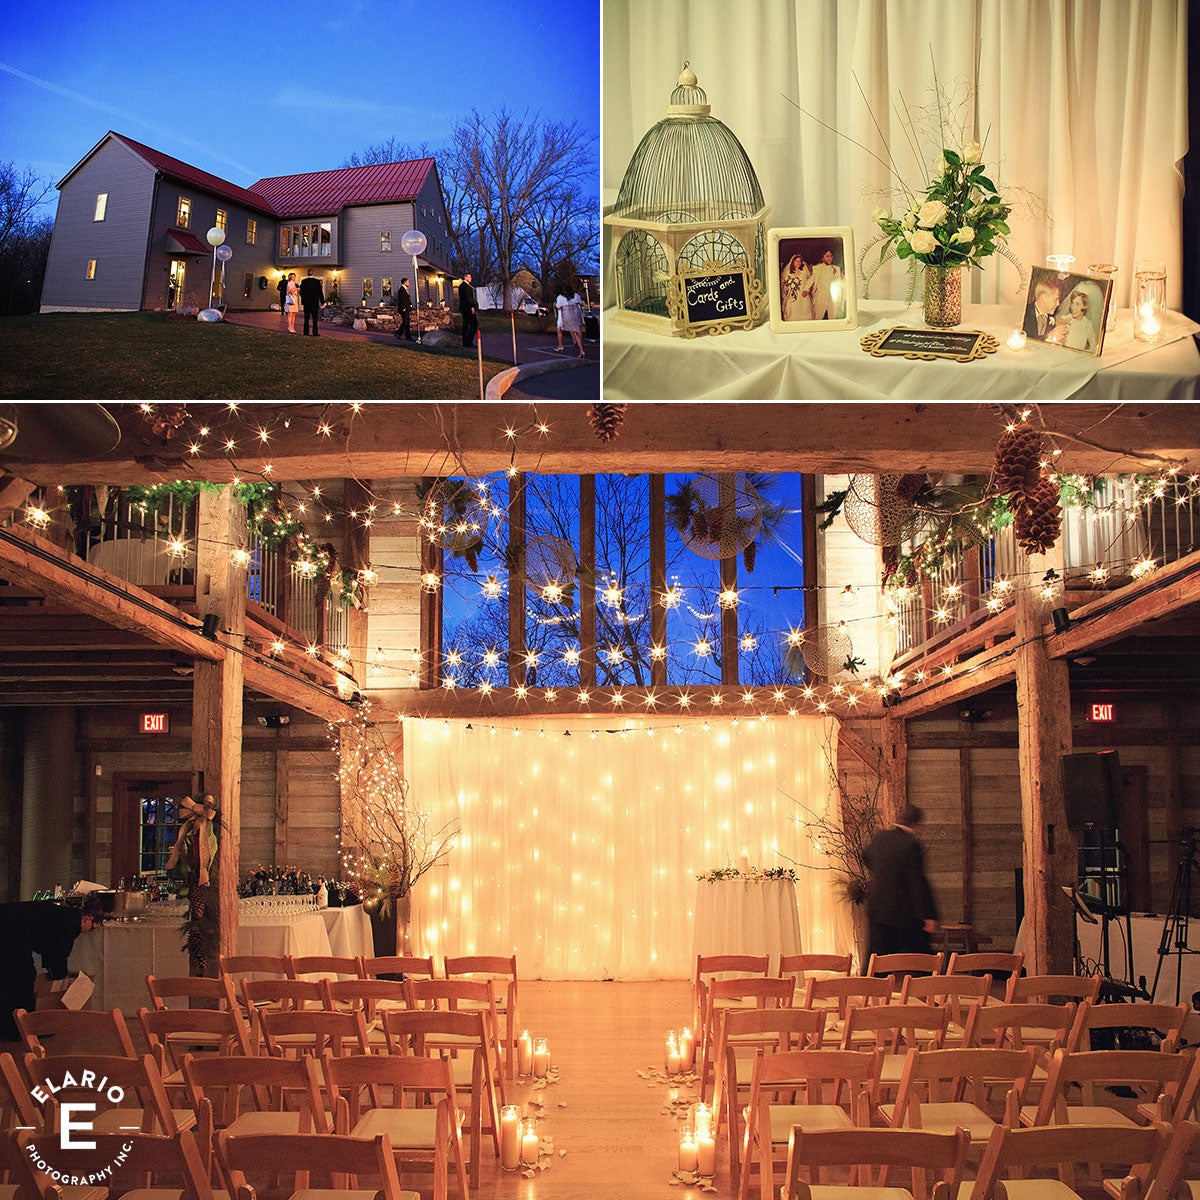 Three images showing a wedding at Pat's Barn: (1) Guests entering, (2) A decorated welcome table, (3) Setup for a ceremony inside of Pat's Barn�